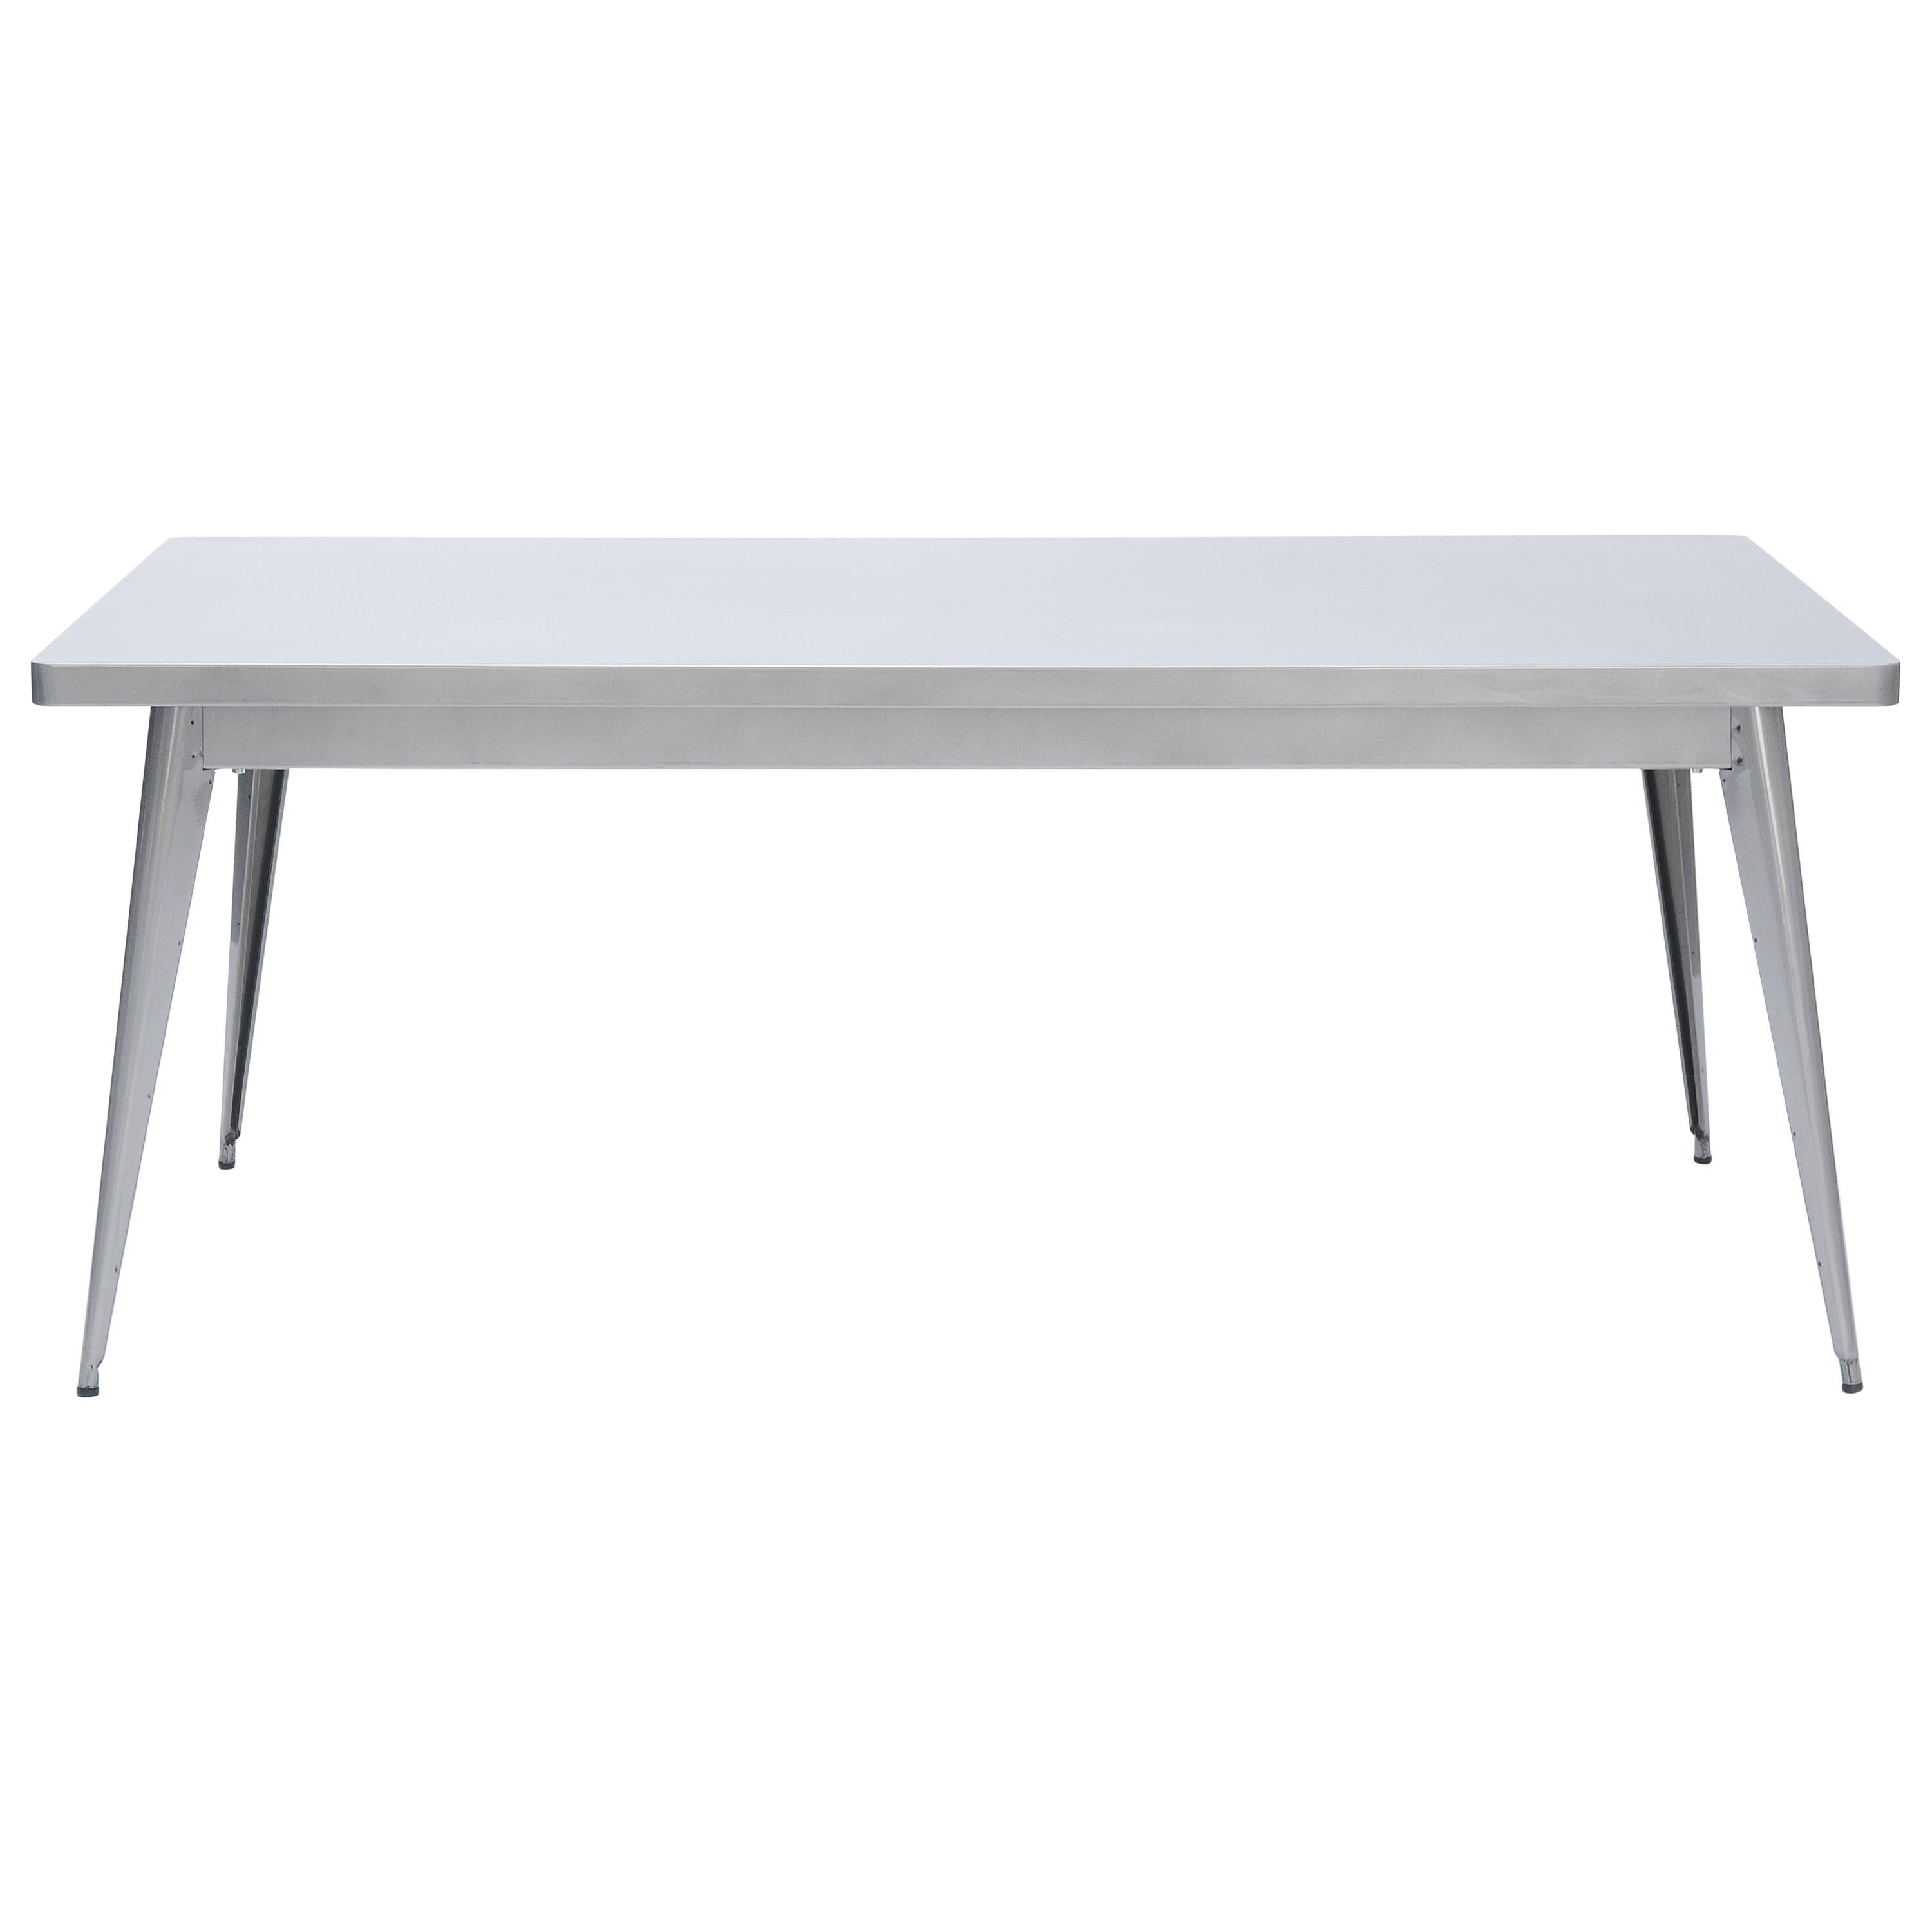 For Sale: Gray (Vernis Brilliant) 55 Medium Table Indoor 80x190 in Essential Colors by Jean Pauchard & Tolix